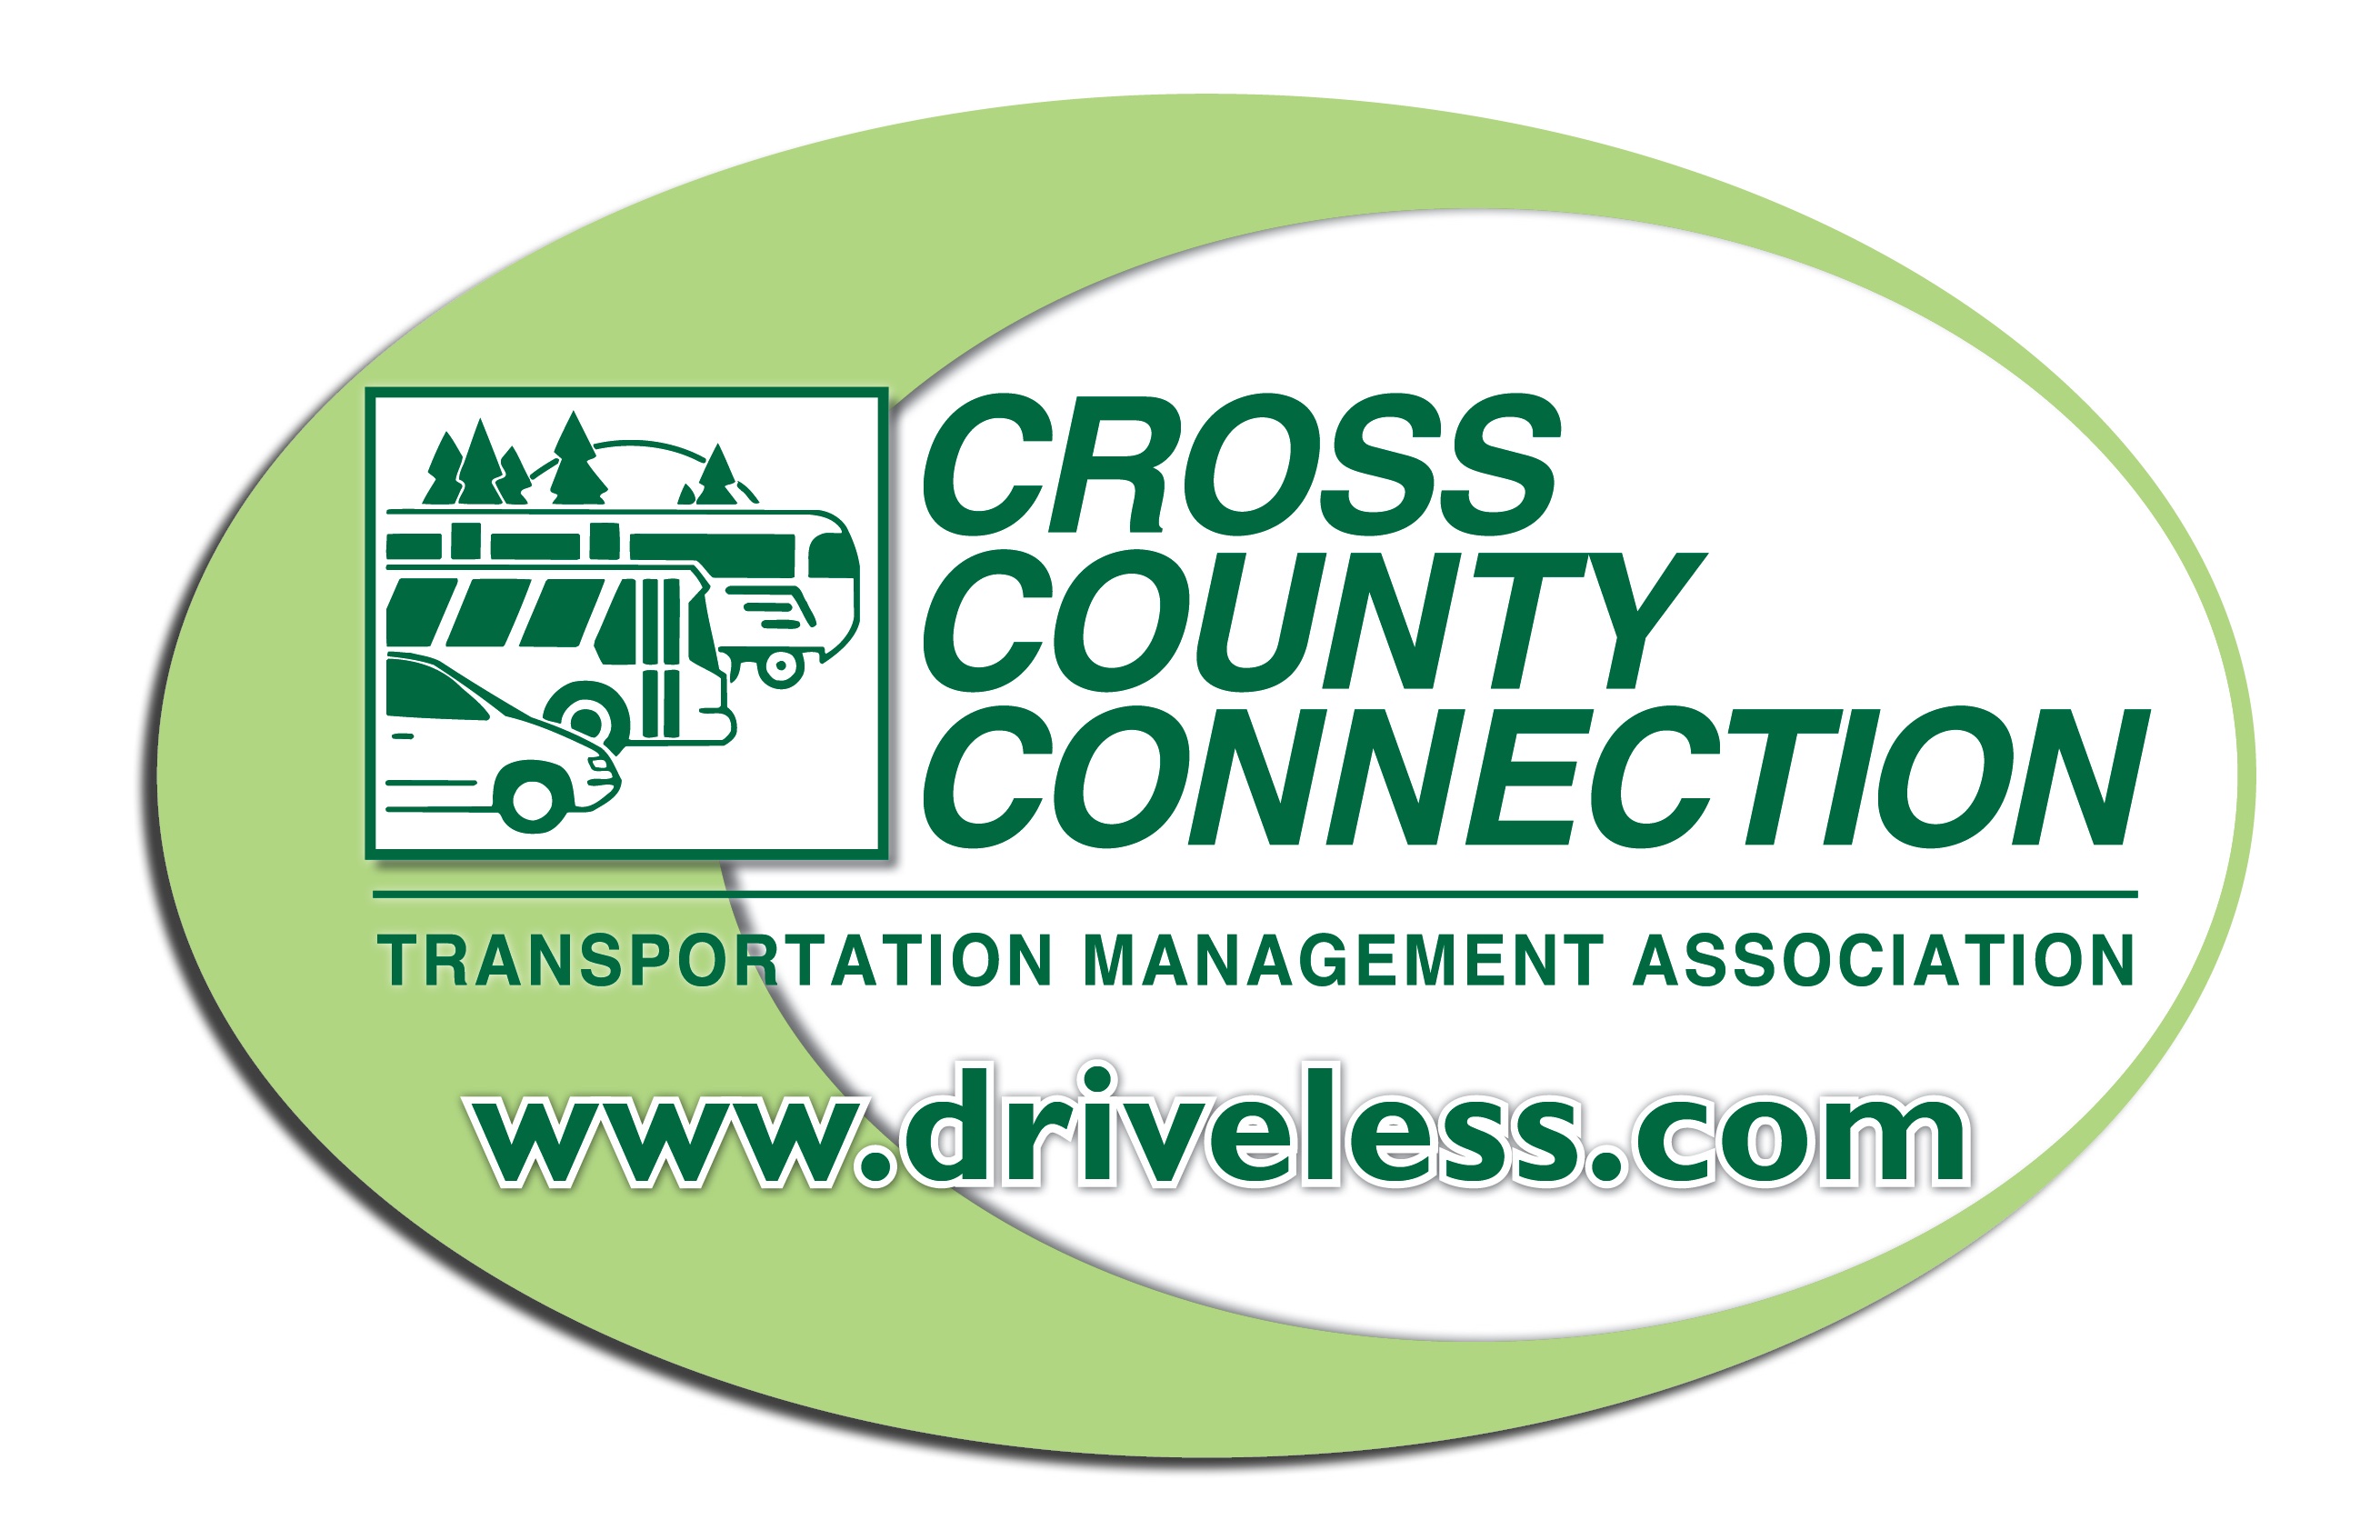 Cross County Connection TMA